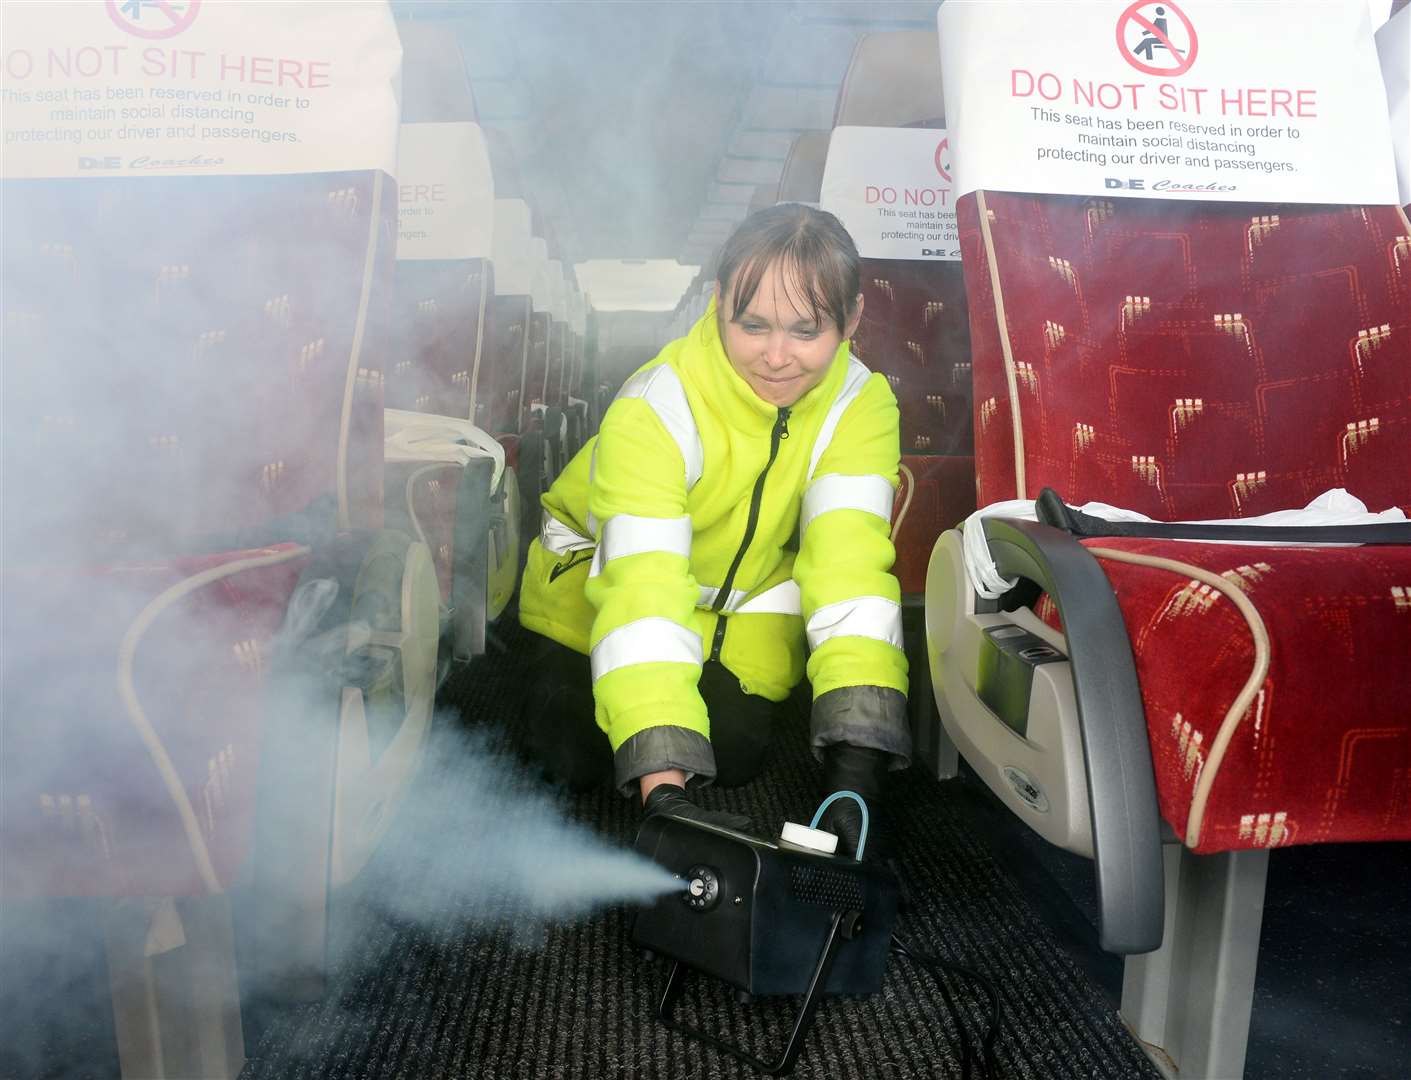 Violeta Grzyb demonstrates the anti-viral sanitising machine which will be deployed across the D&E Coaches fleet daily.